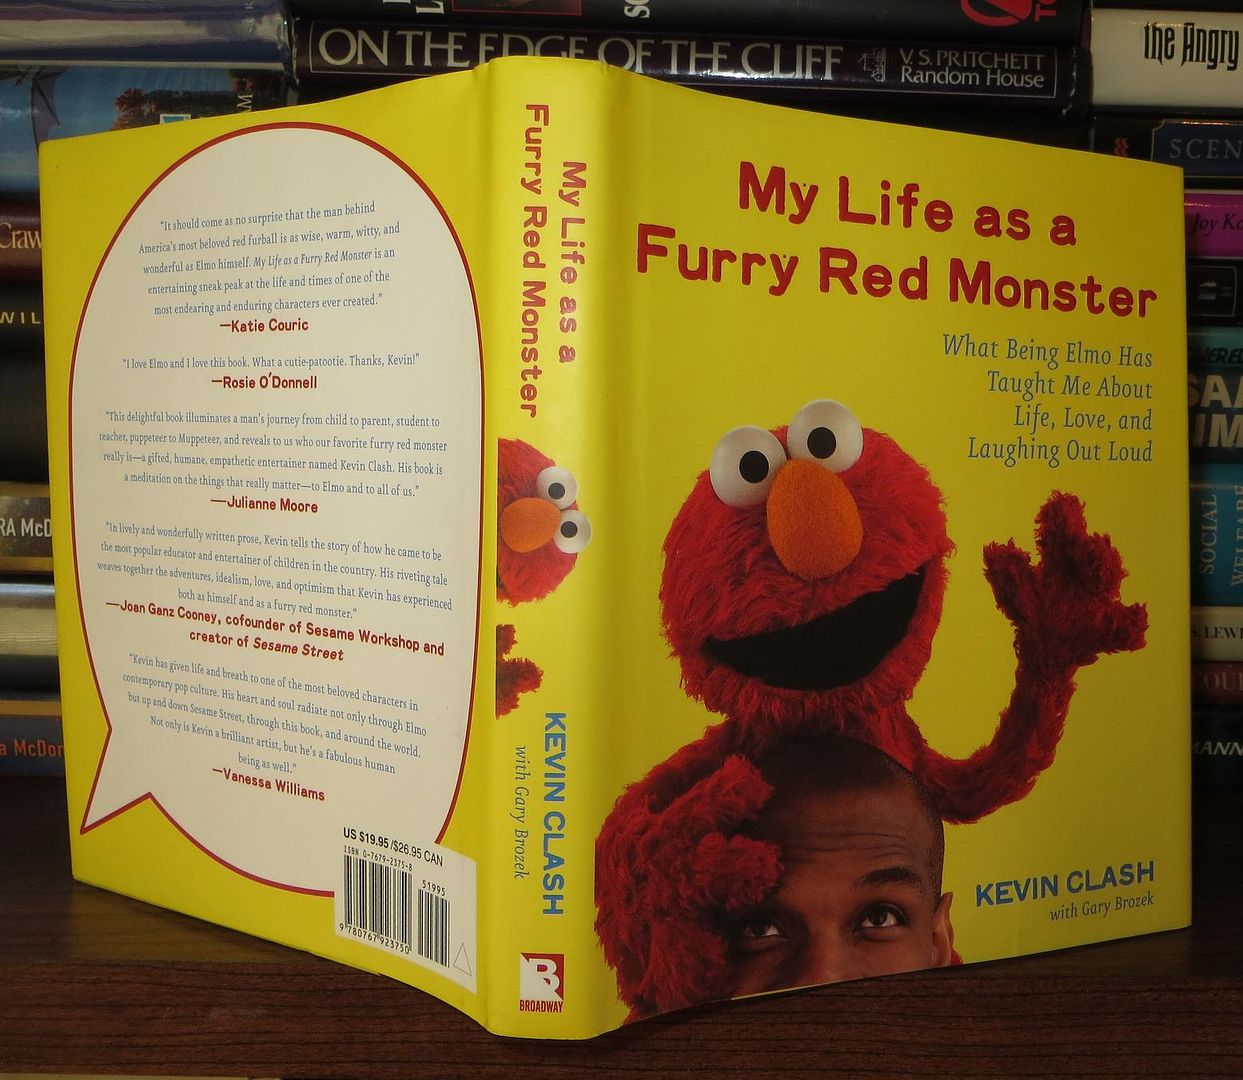 CLASH, KEVIN &  GARY BROZEK - My Life As a Furry Red Monster What Being Elmo Has Taught Me About Life, Love and Laughing out Loud